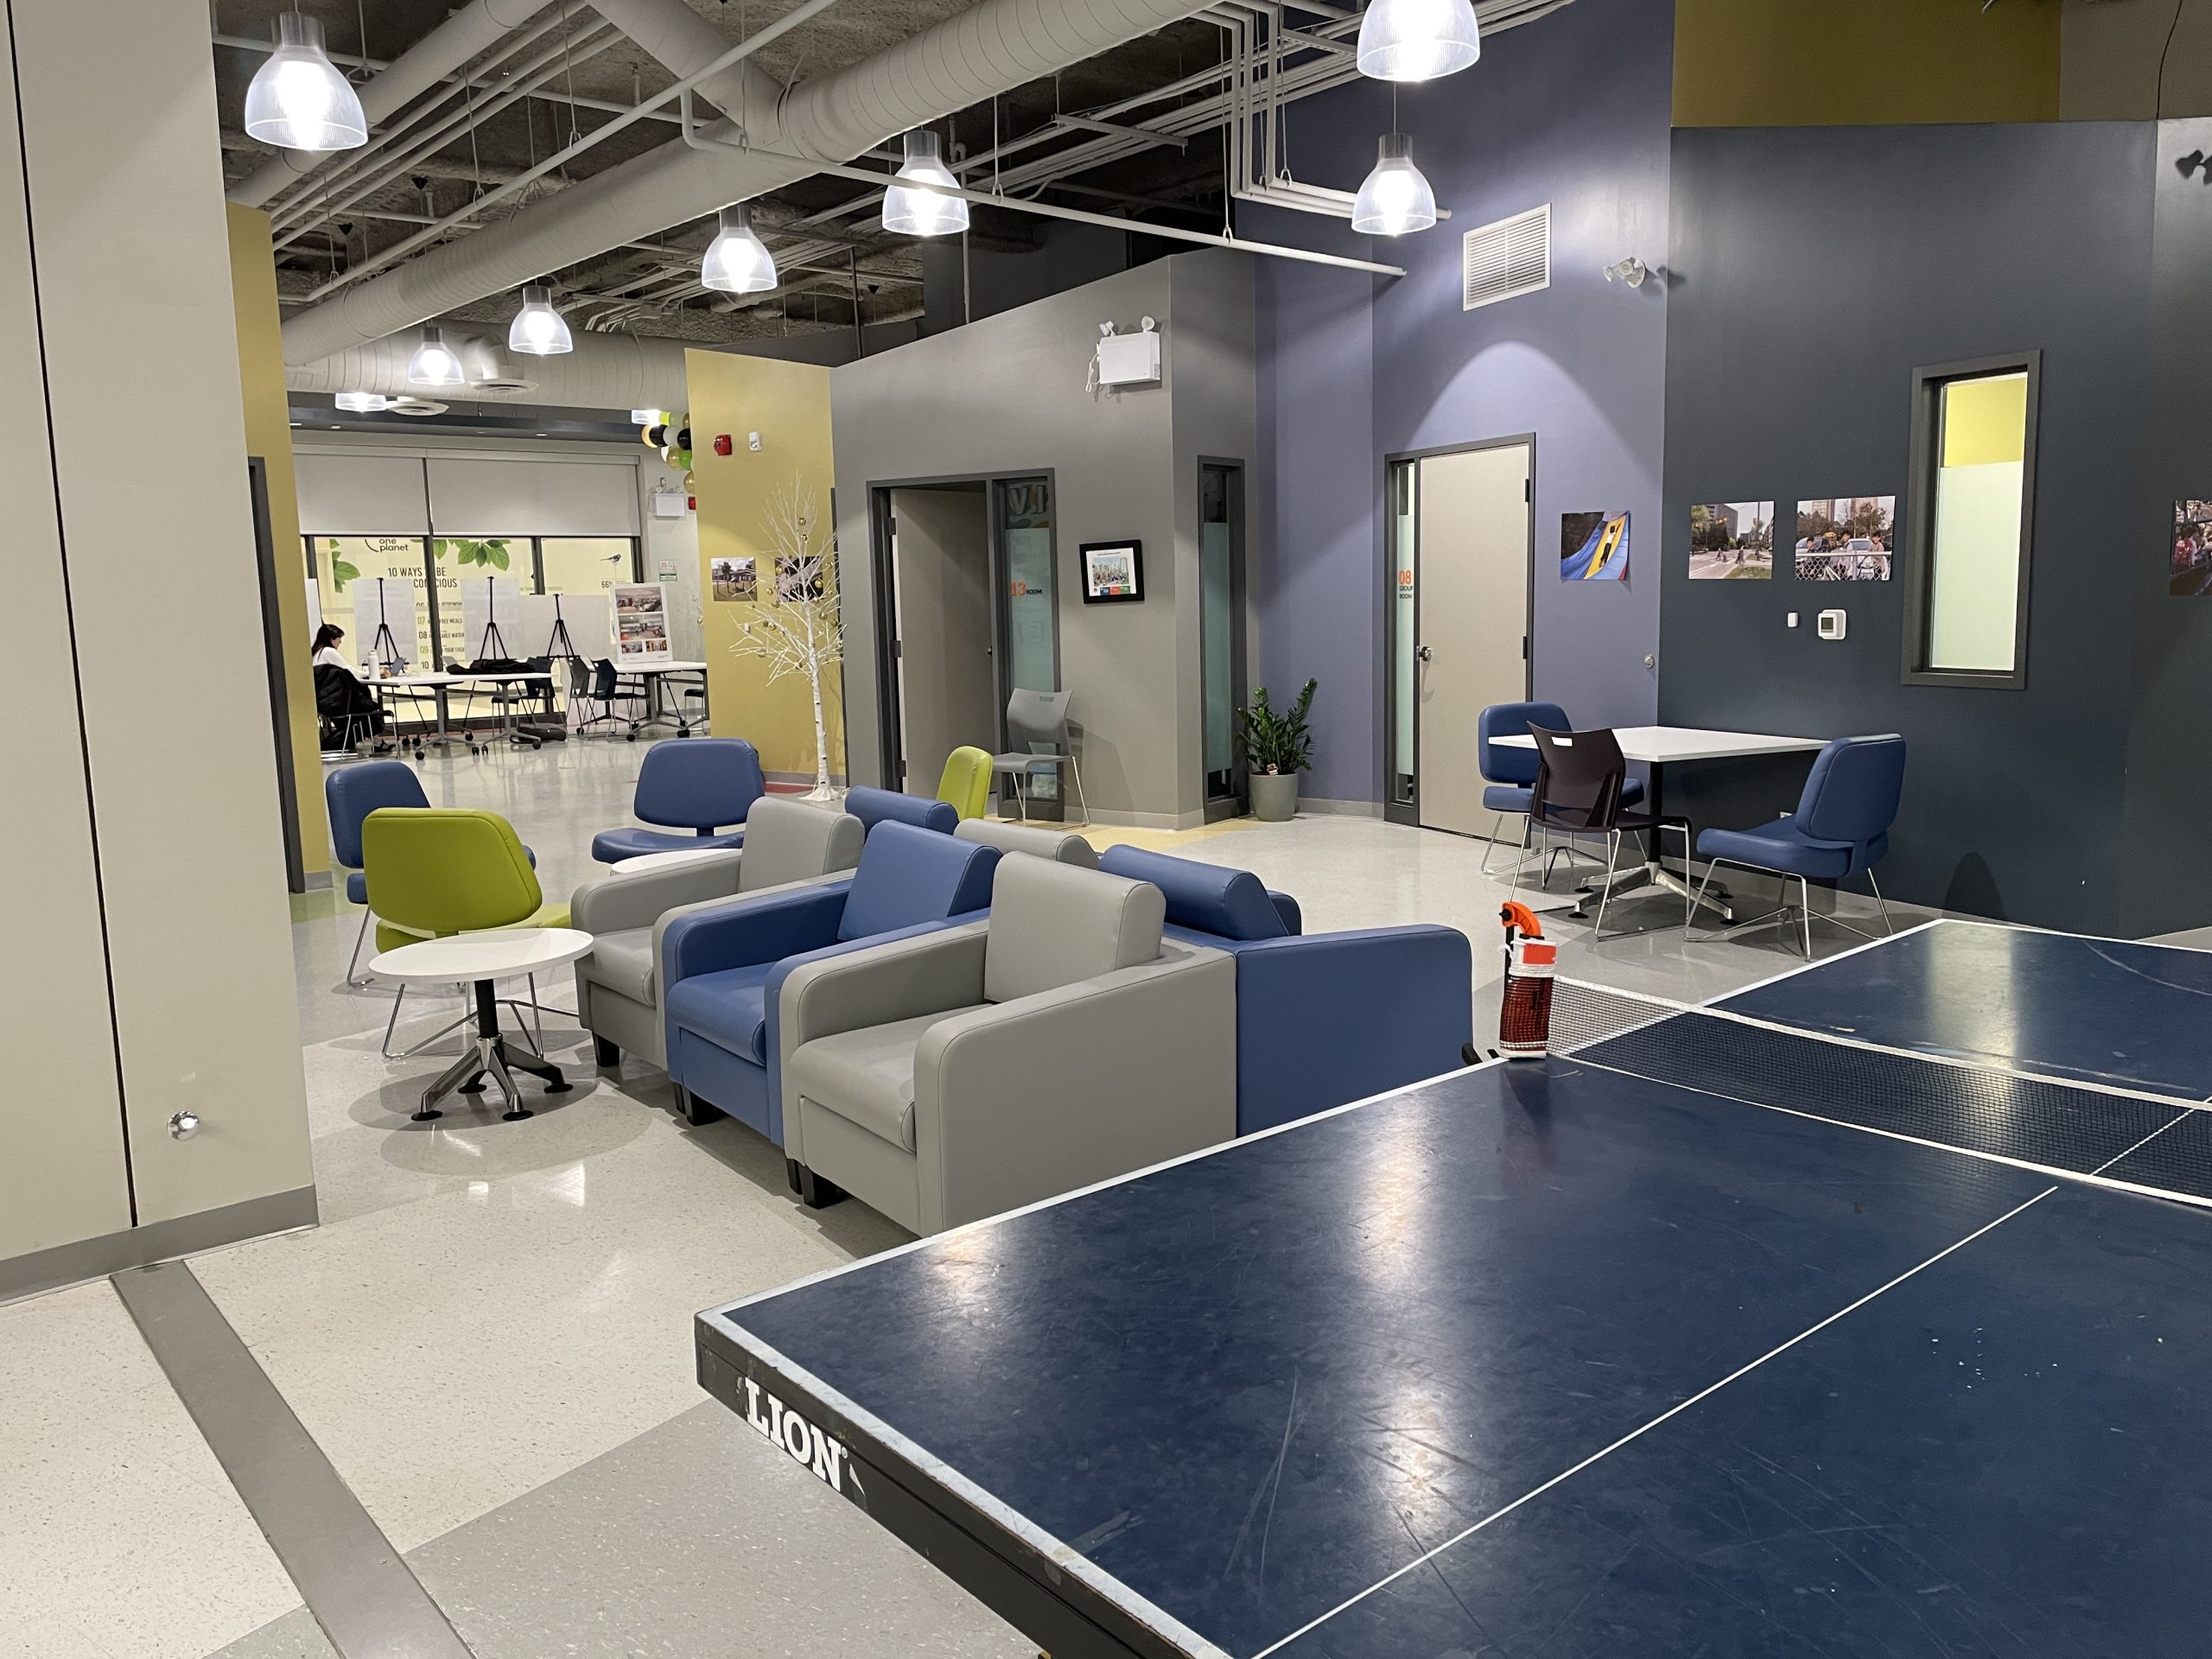 The lounge at the Thorncliffe Park Youth Wellness Hub